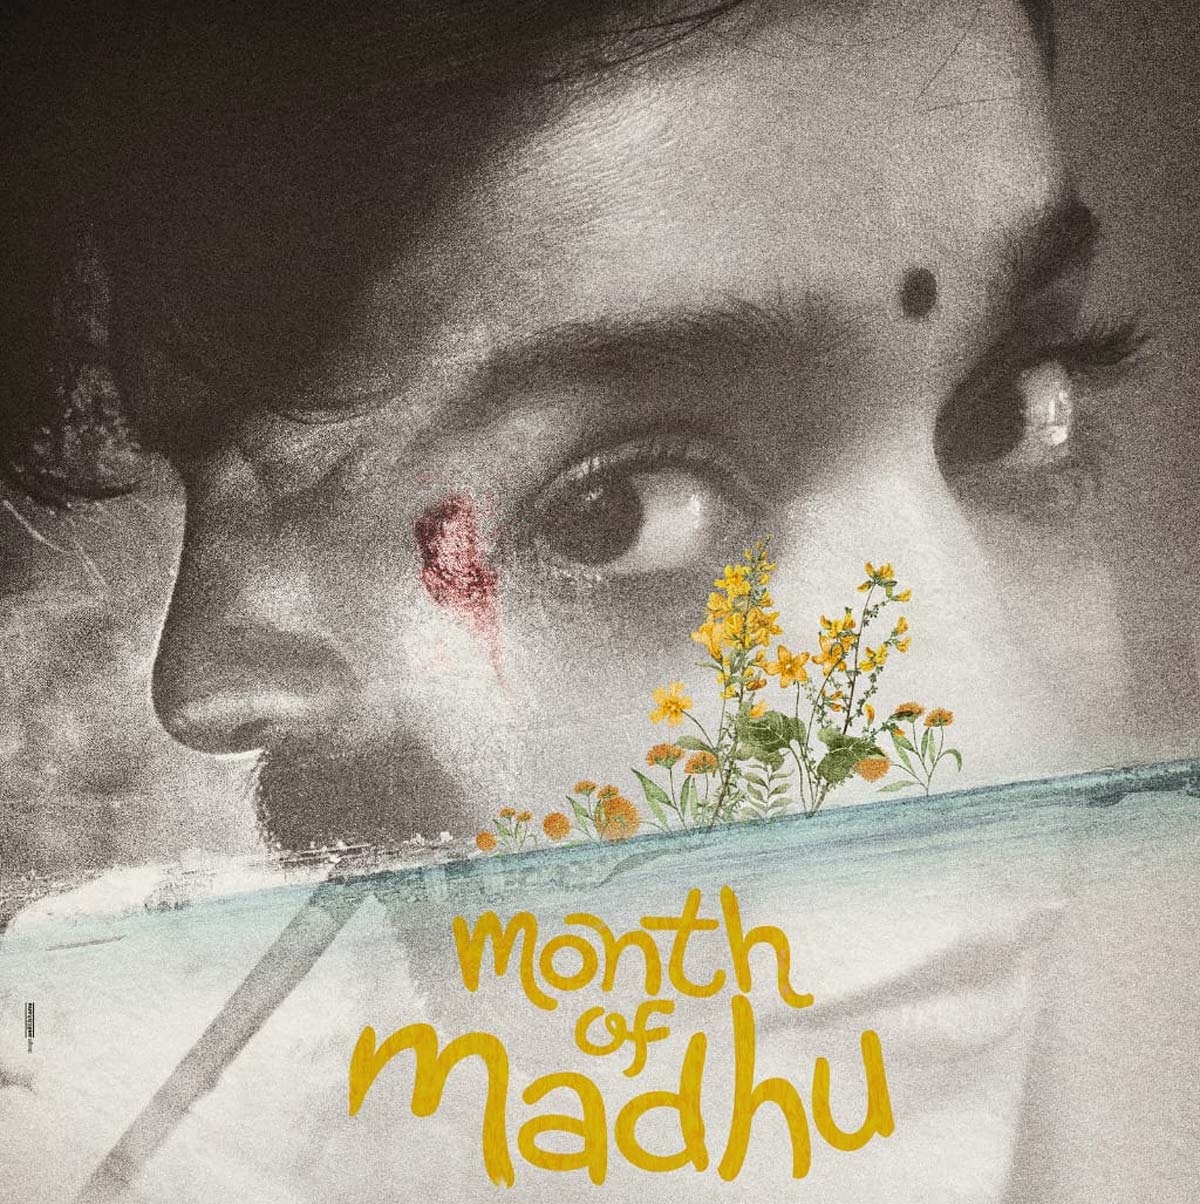 Month of Madhu Movie Review